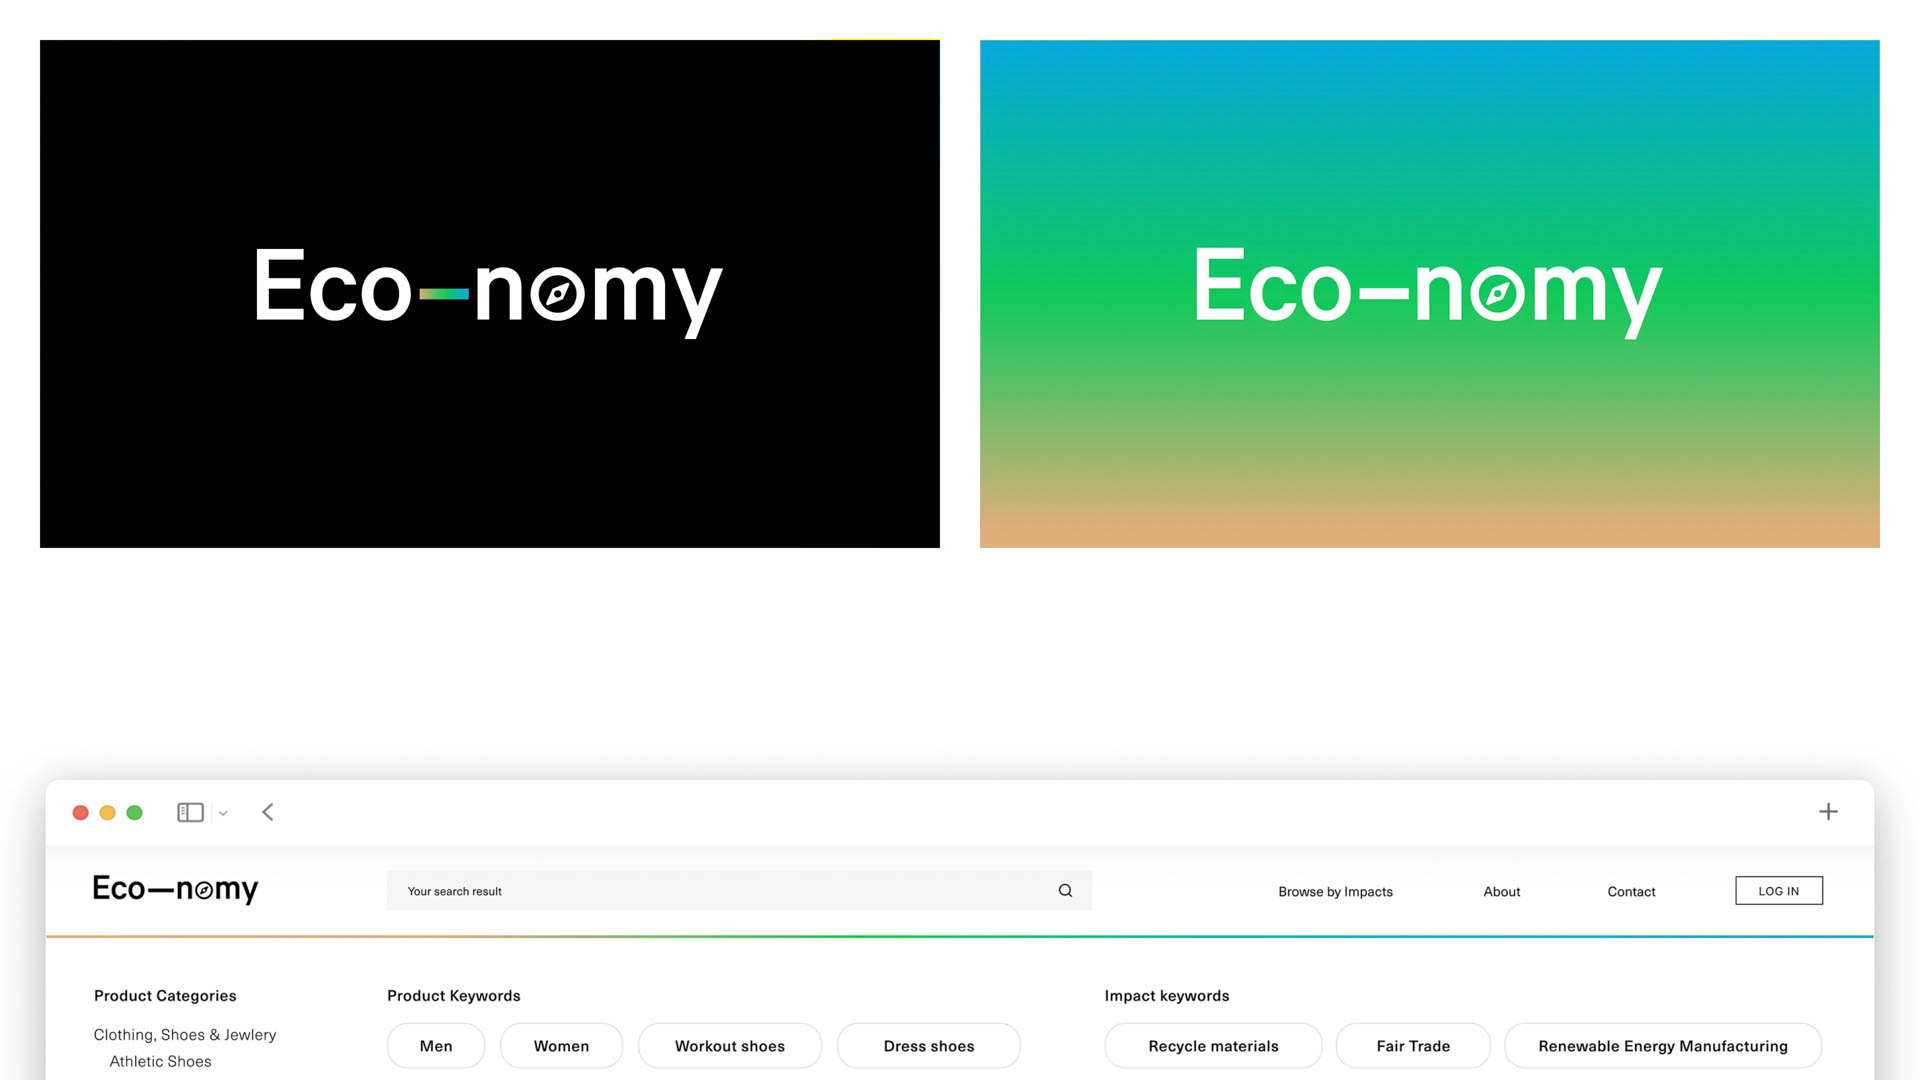 Two versions of the Eco-nomy brand logo